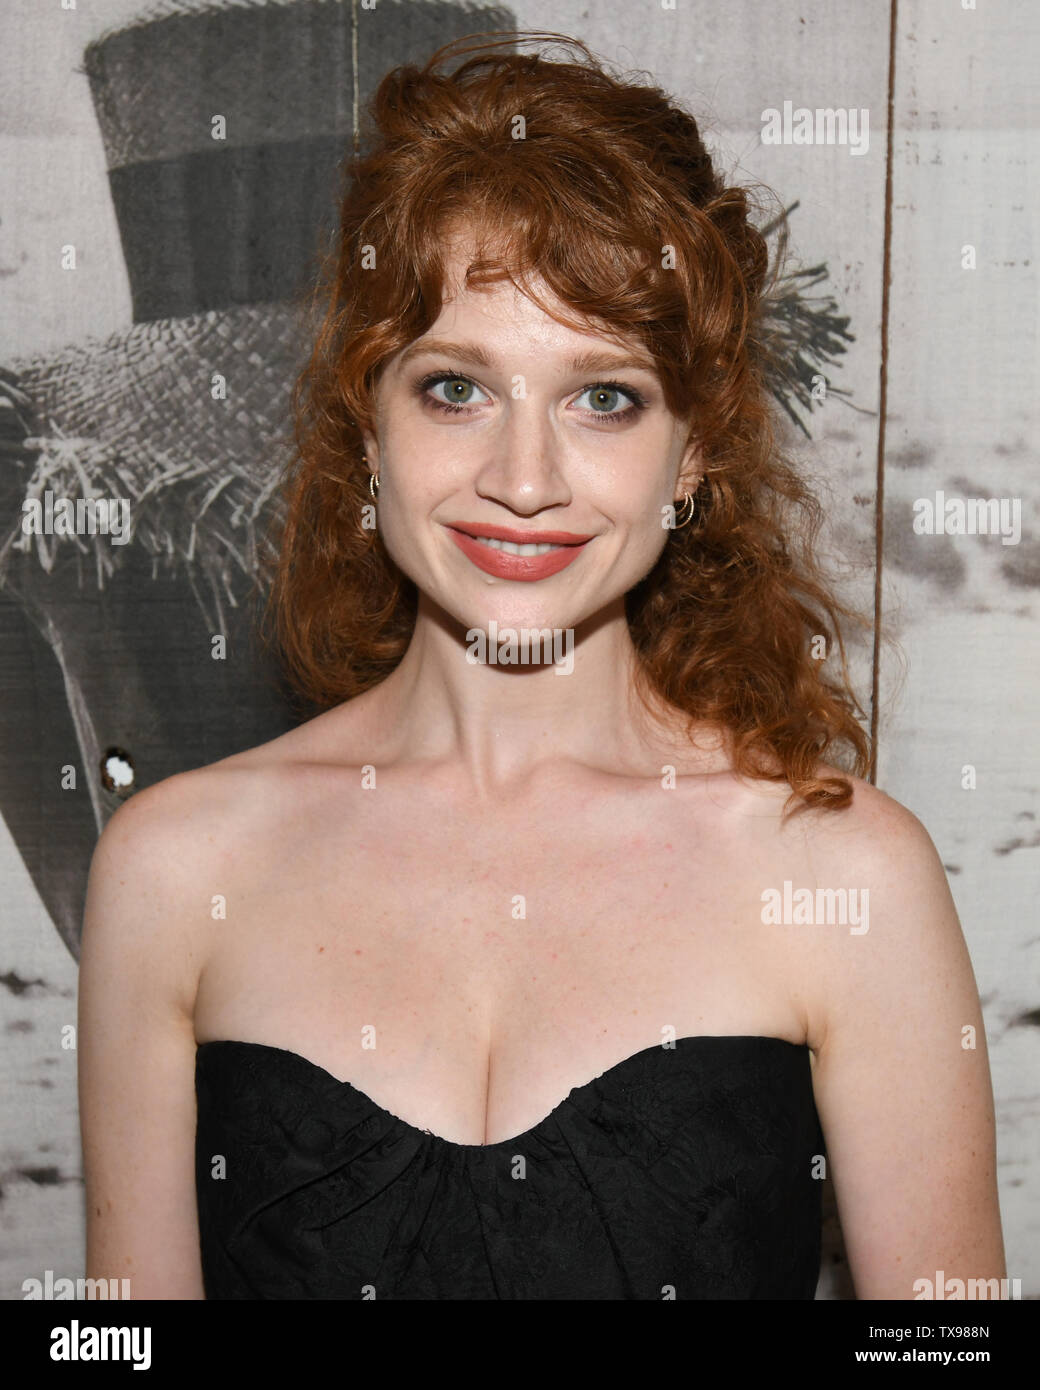 June 23, 2019 - Sarah Hay attends 'Love and Art' group show at the Lumber Yard Gallery in Malibu, California. (Credit Image: © Billy Bennight/ZUMA Wire) Stock Photo